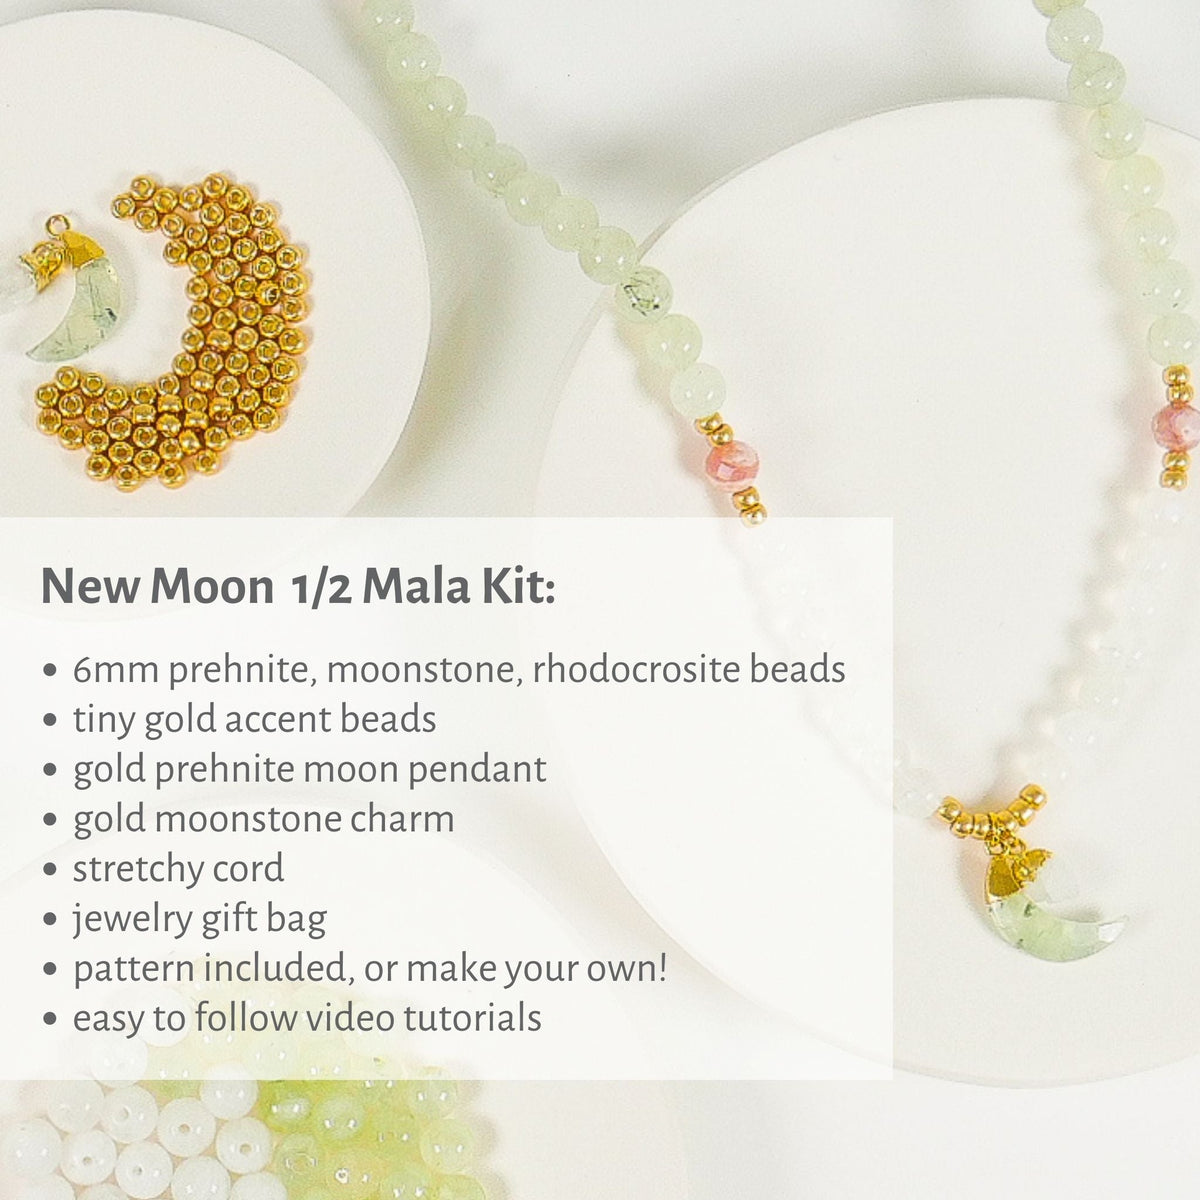 New Moon 1/2 Mala Stretch Bracelet (AVAILABLE TO SHIP THE WEEK OF SEPT 27TH!)